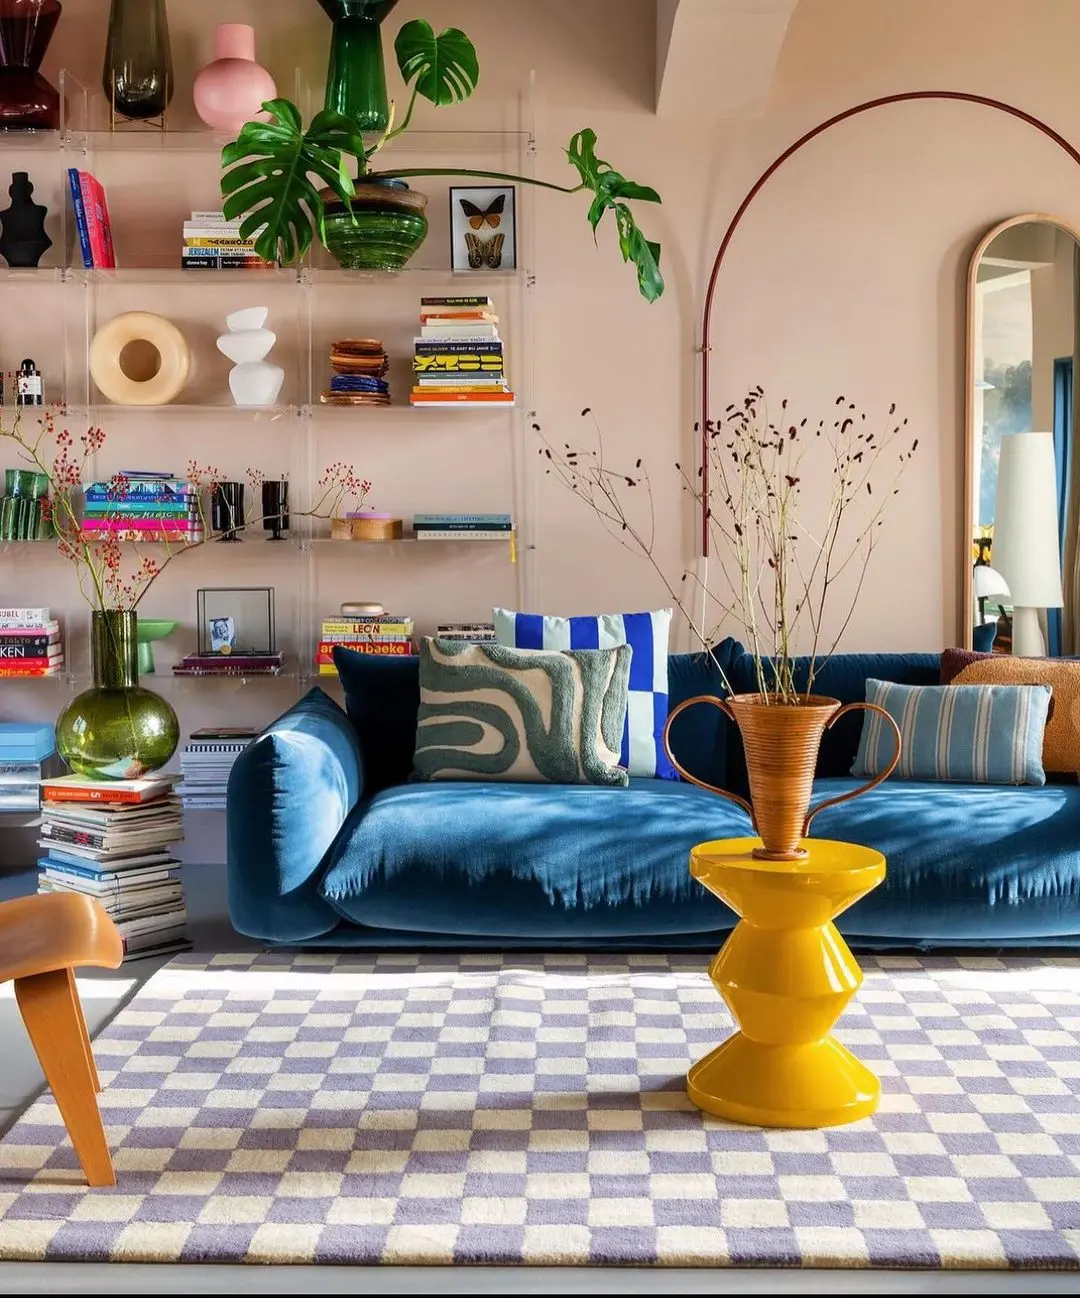 a blue couch or a bright yellow centre table are ways to add a pop of color to a funky decor as in this living room. 